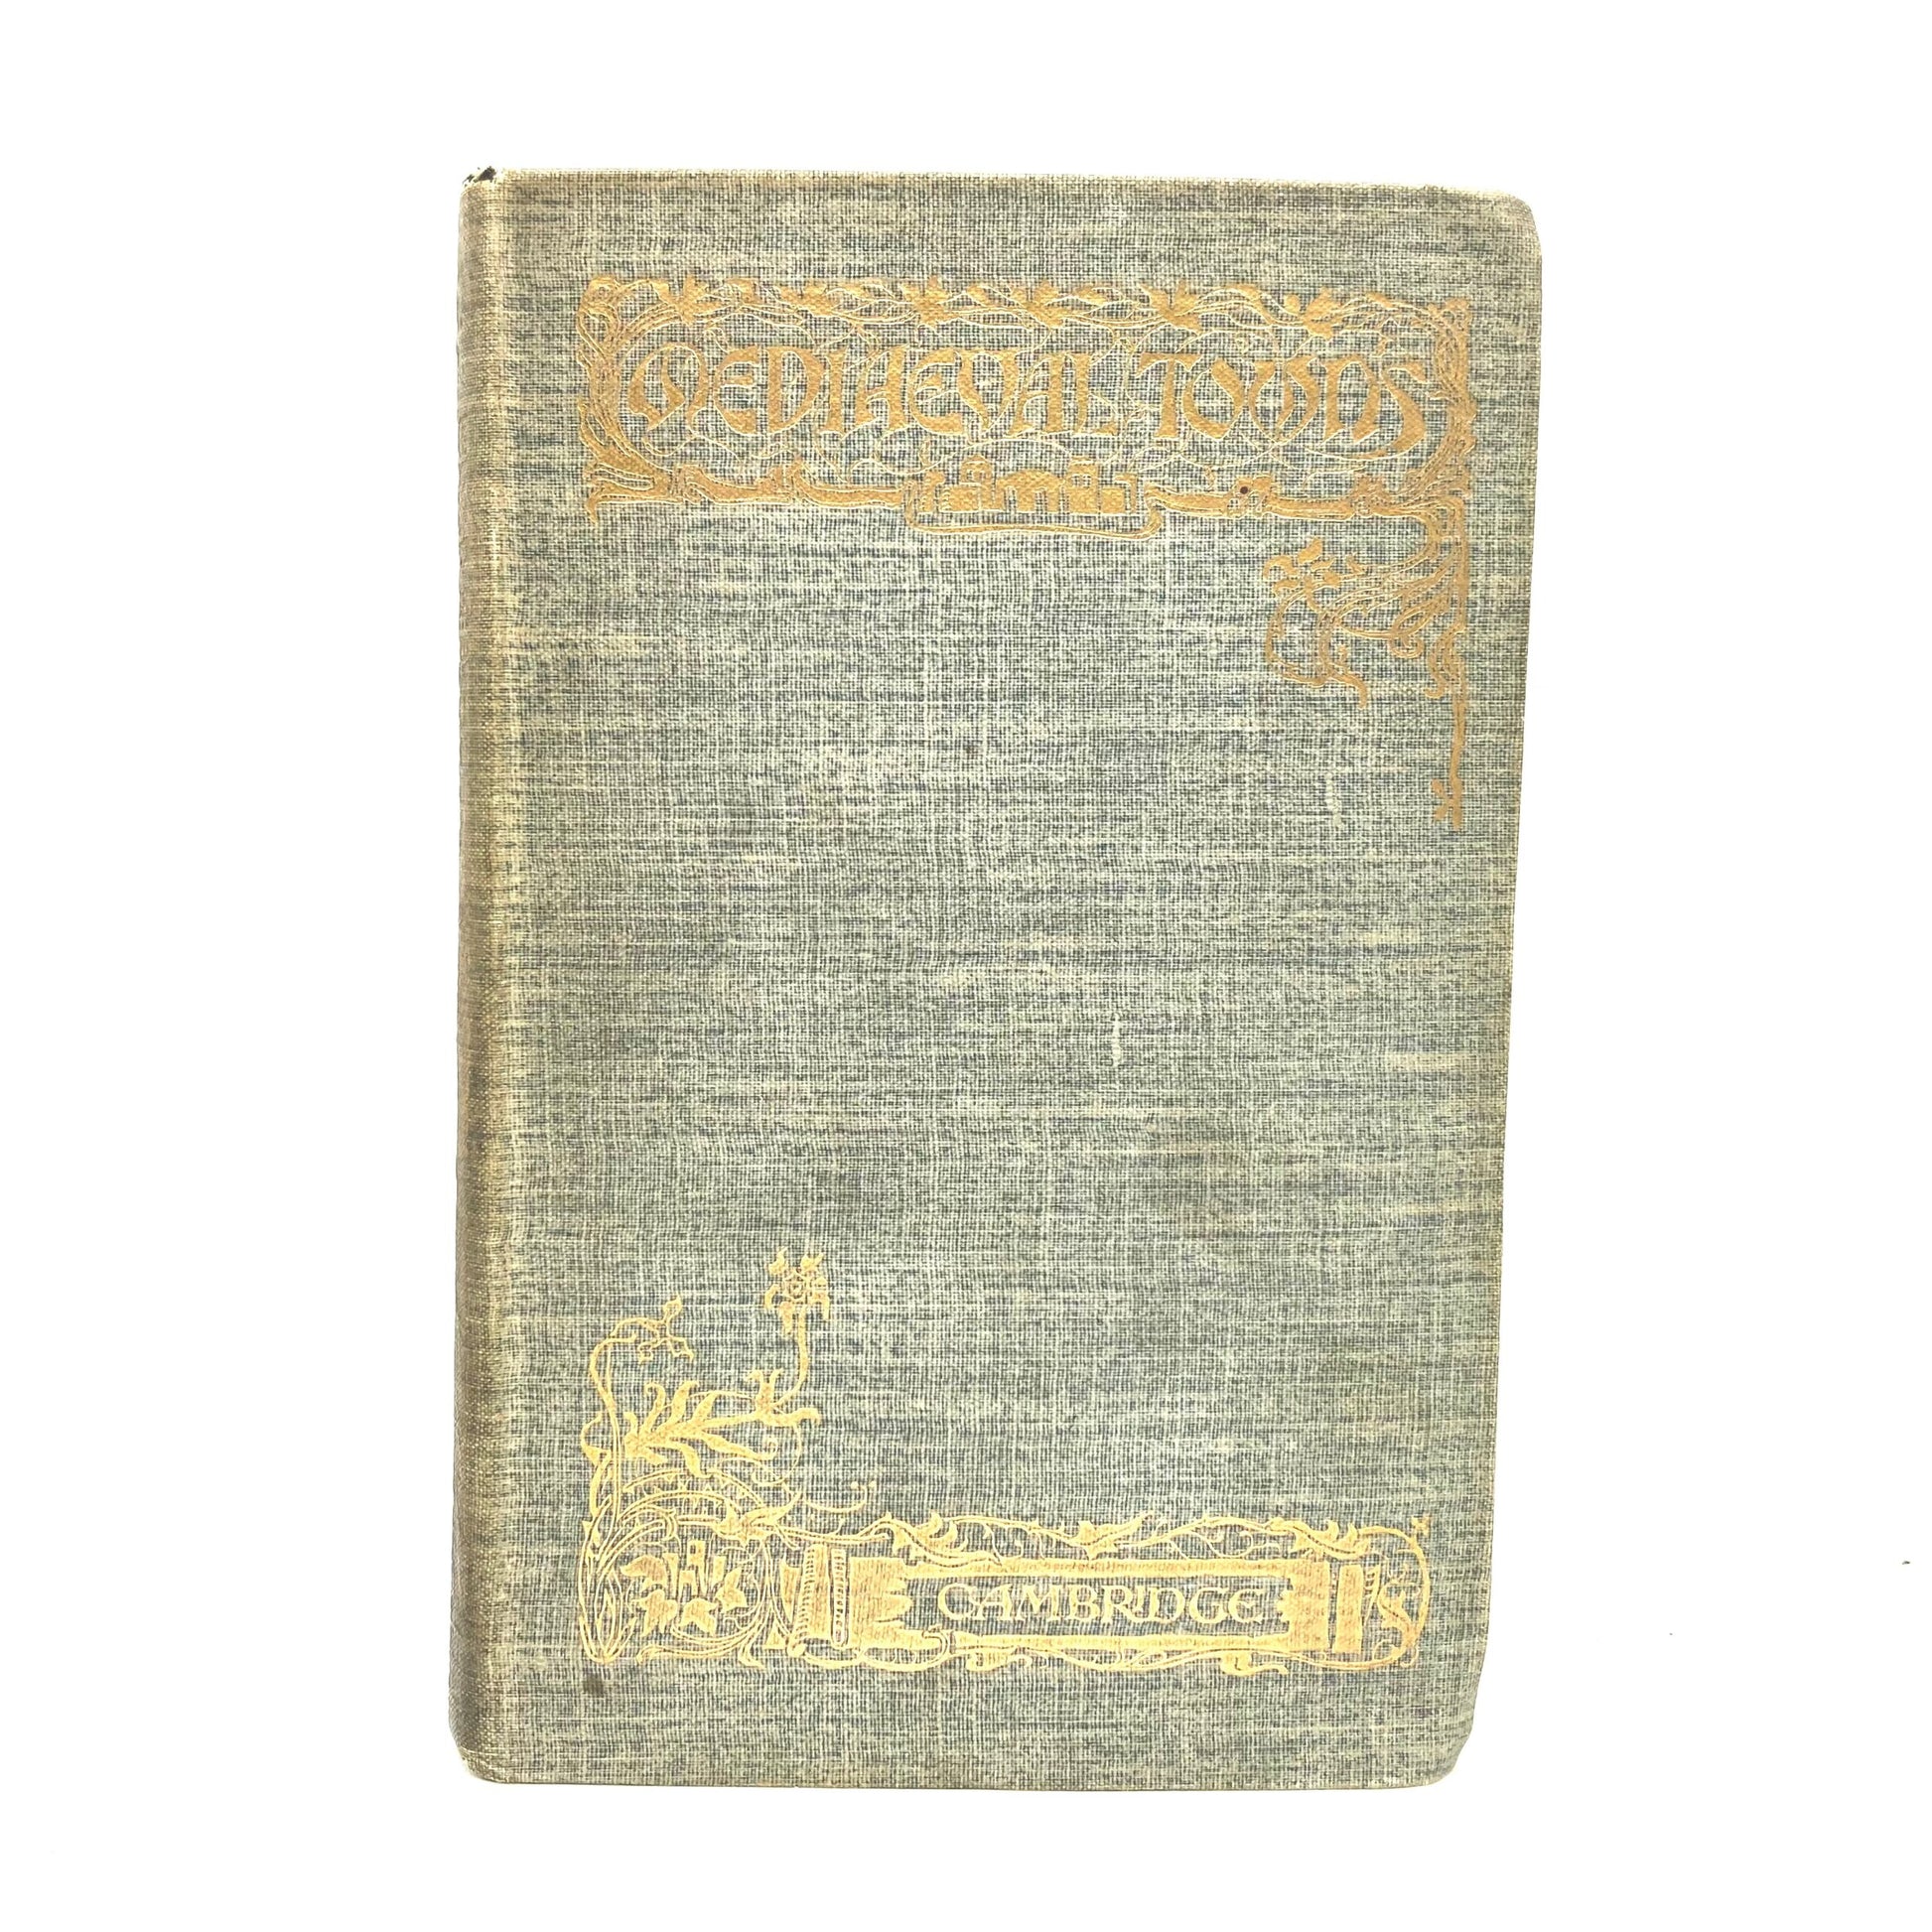 STUBBS, Charles W. "The Story of Cambridge" [JM Dent & Co, 1905] - Buzz Bookstore